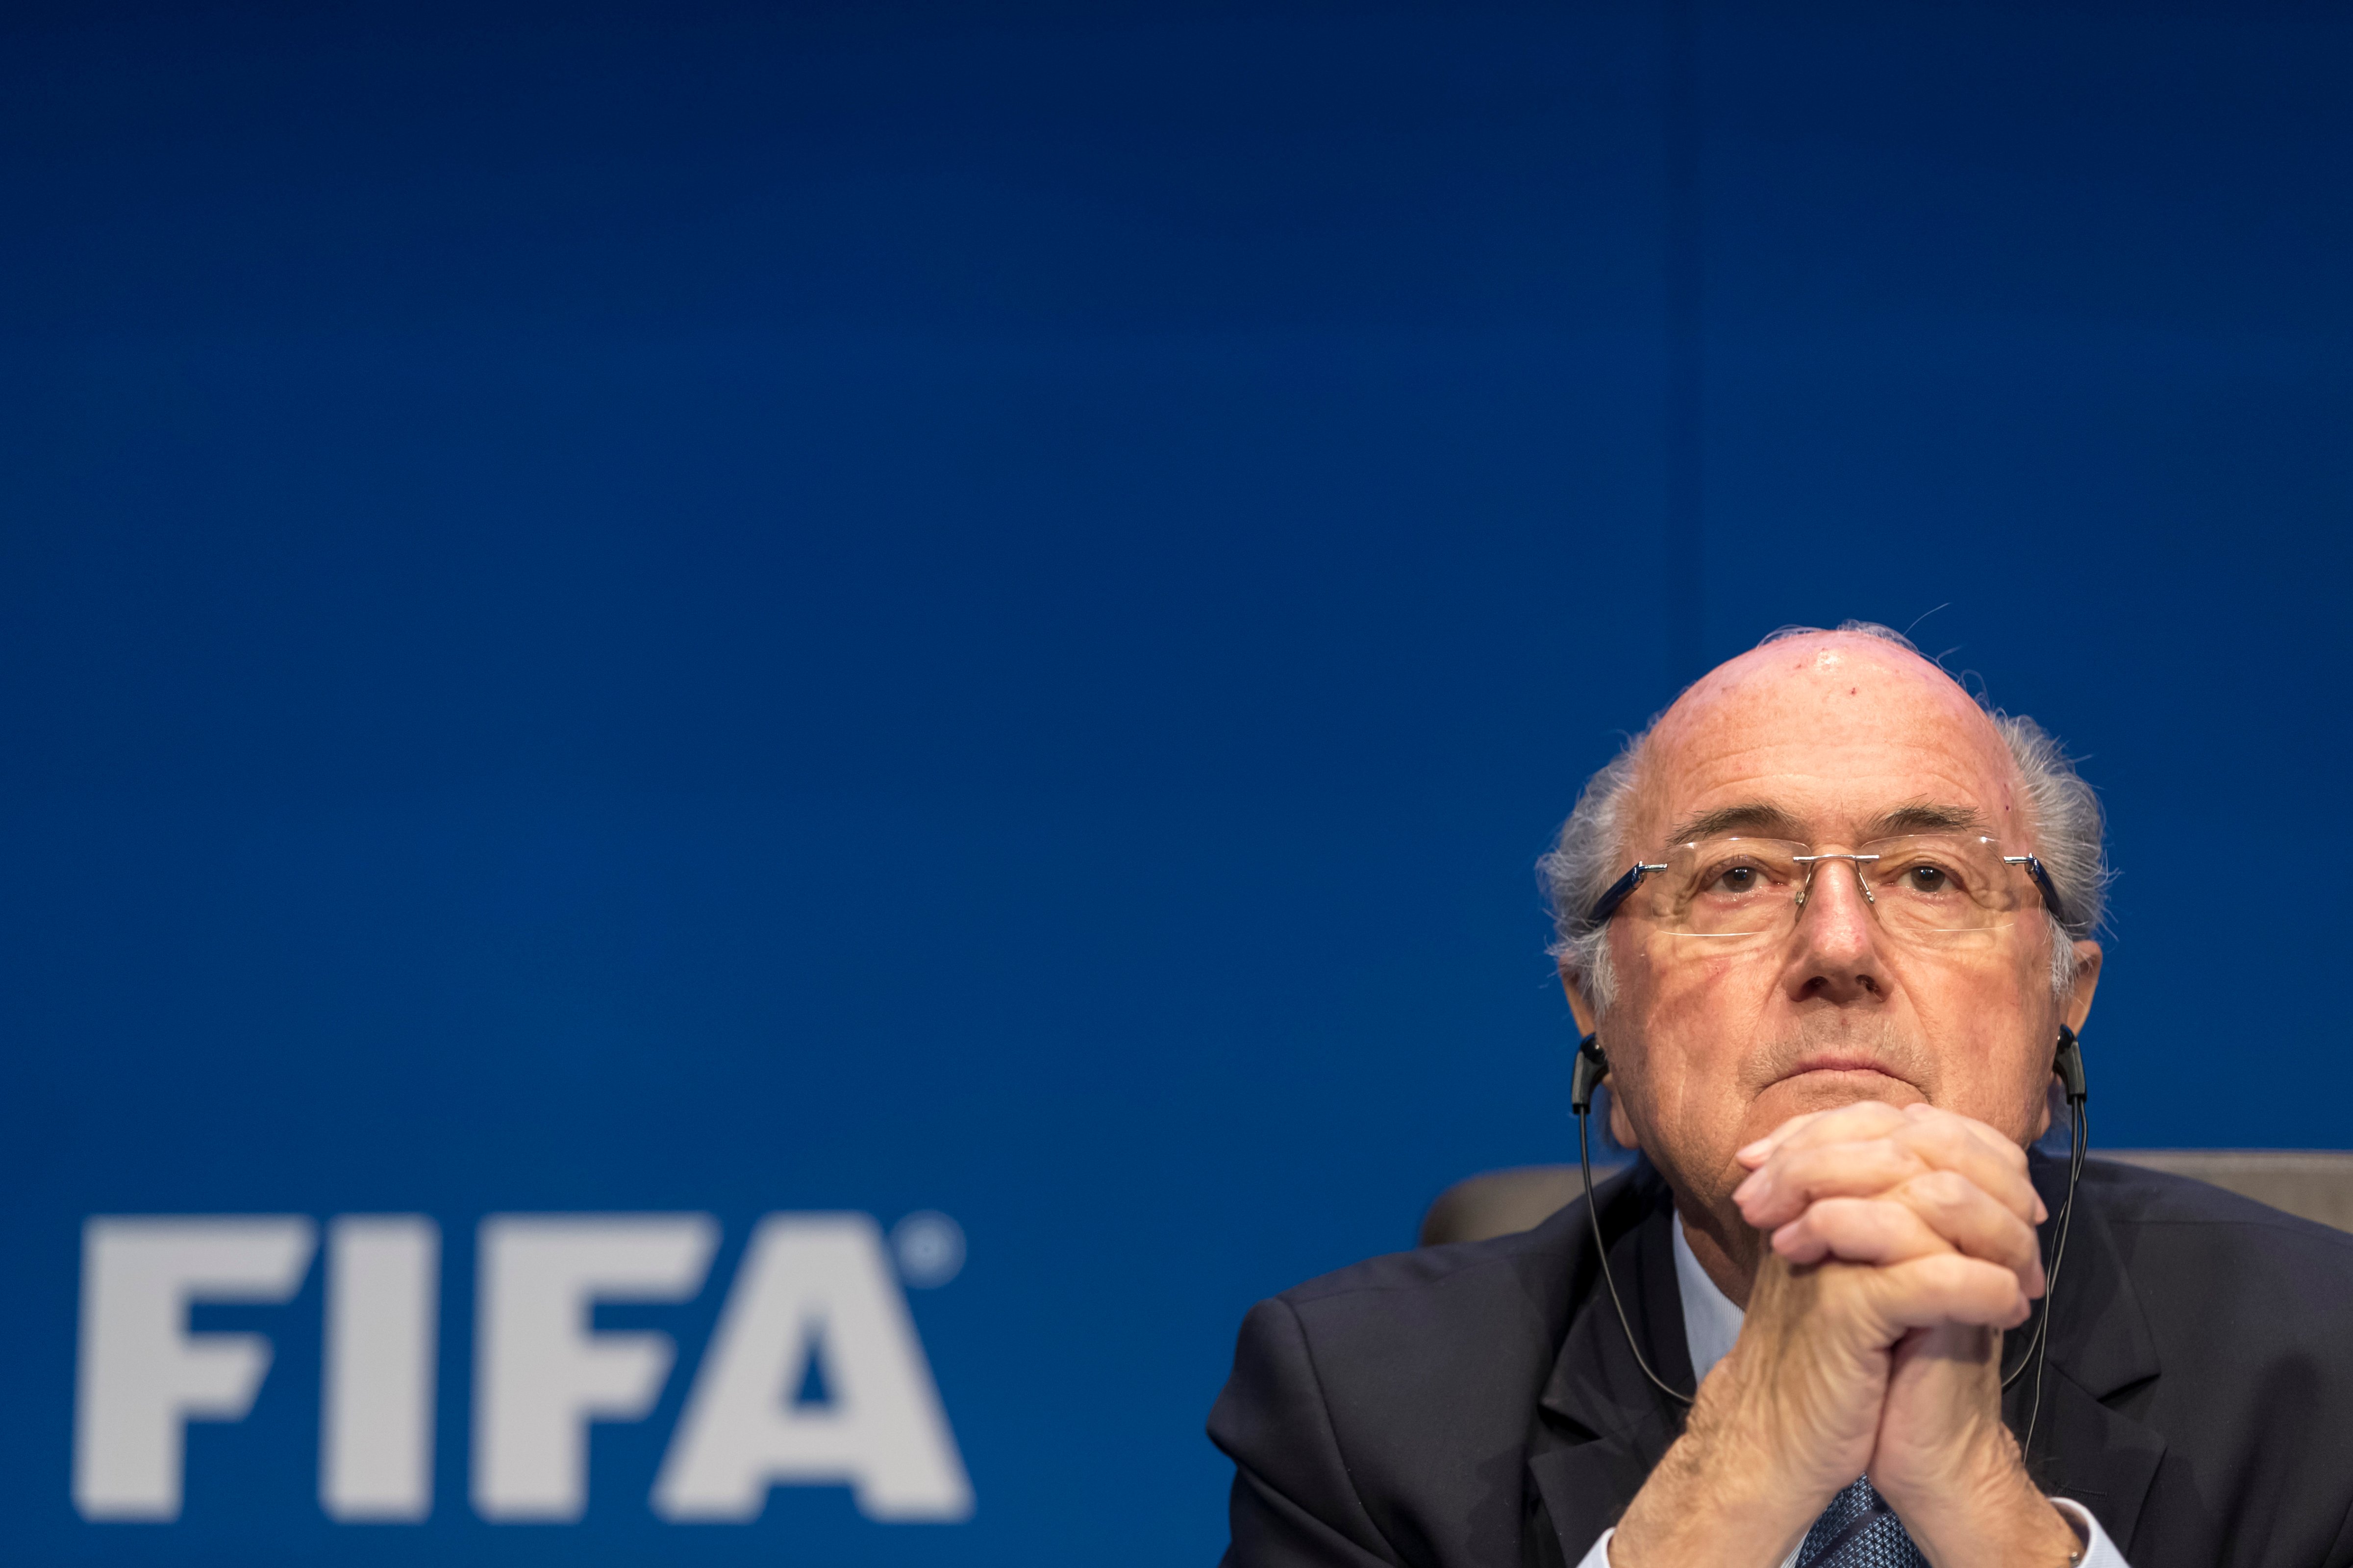 FIFA President Joseph S. Blatter talks to the press during the FIFA Post Congress Week Press Conference at the Home of FIFA on May 30, 2015 in Zurich. (Alessandro Della Bella—Getty Images)